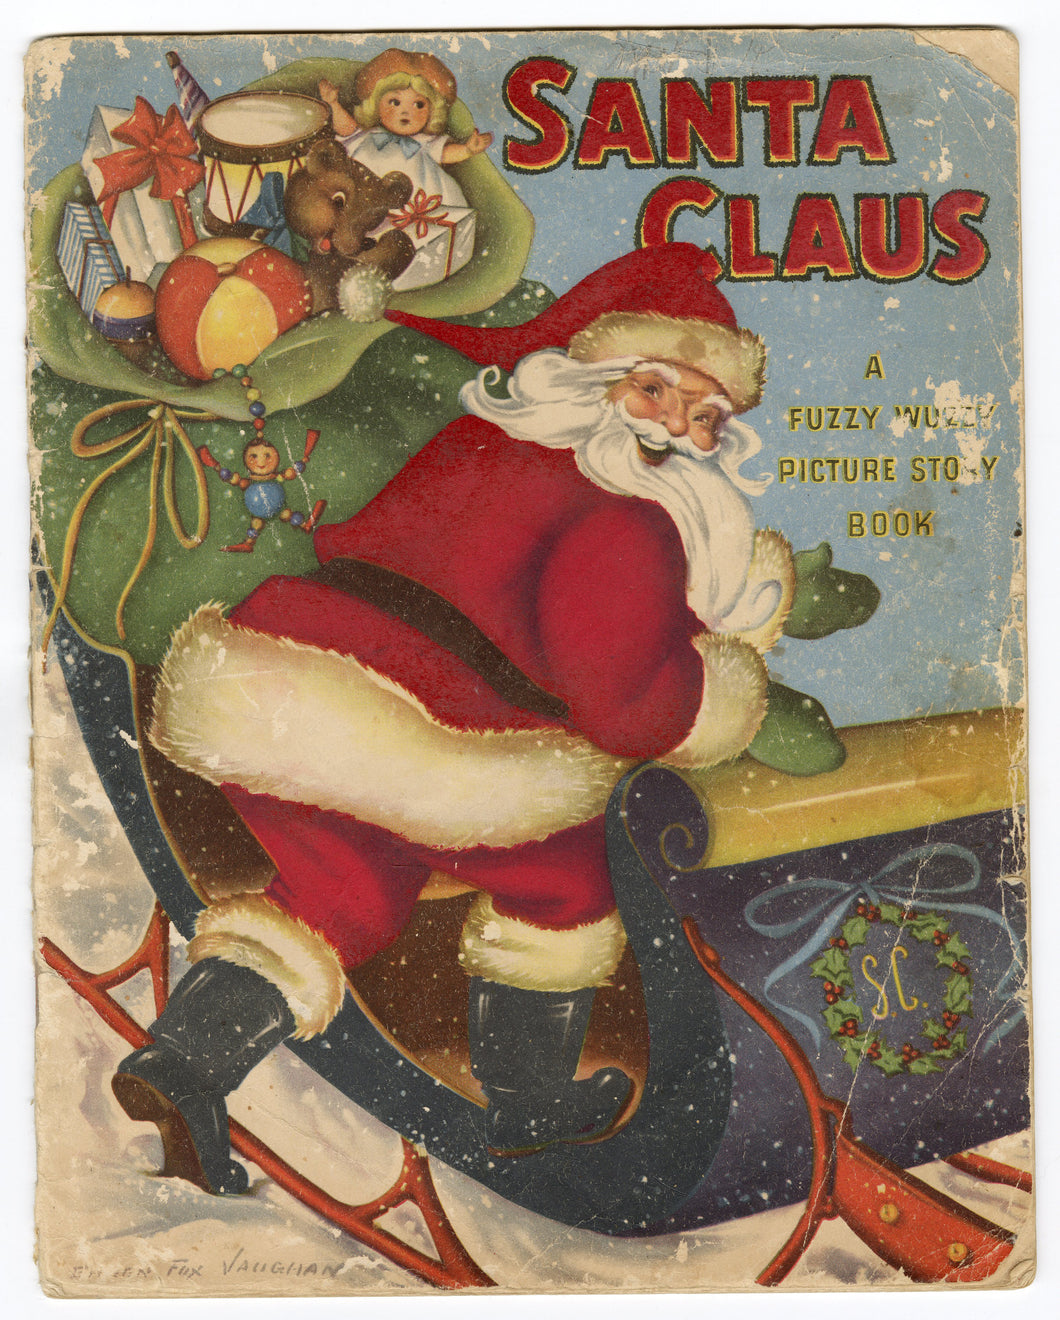 1947 Children's SANTA CLAUS Fuzzy Wuzzy Storybook, Flocked Christmas Pages